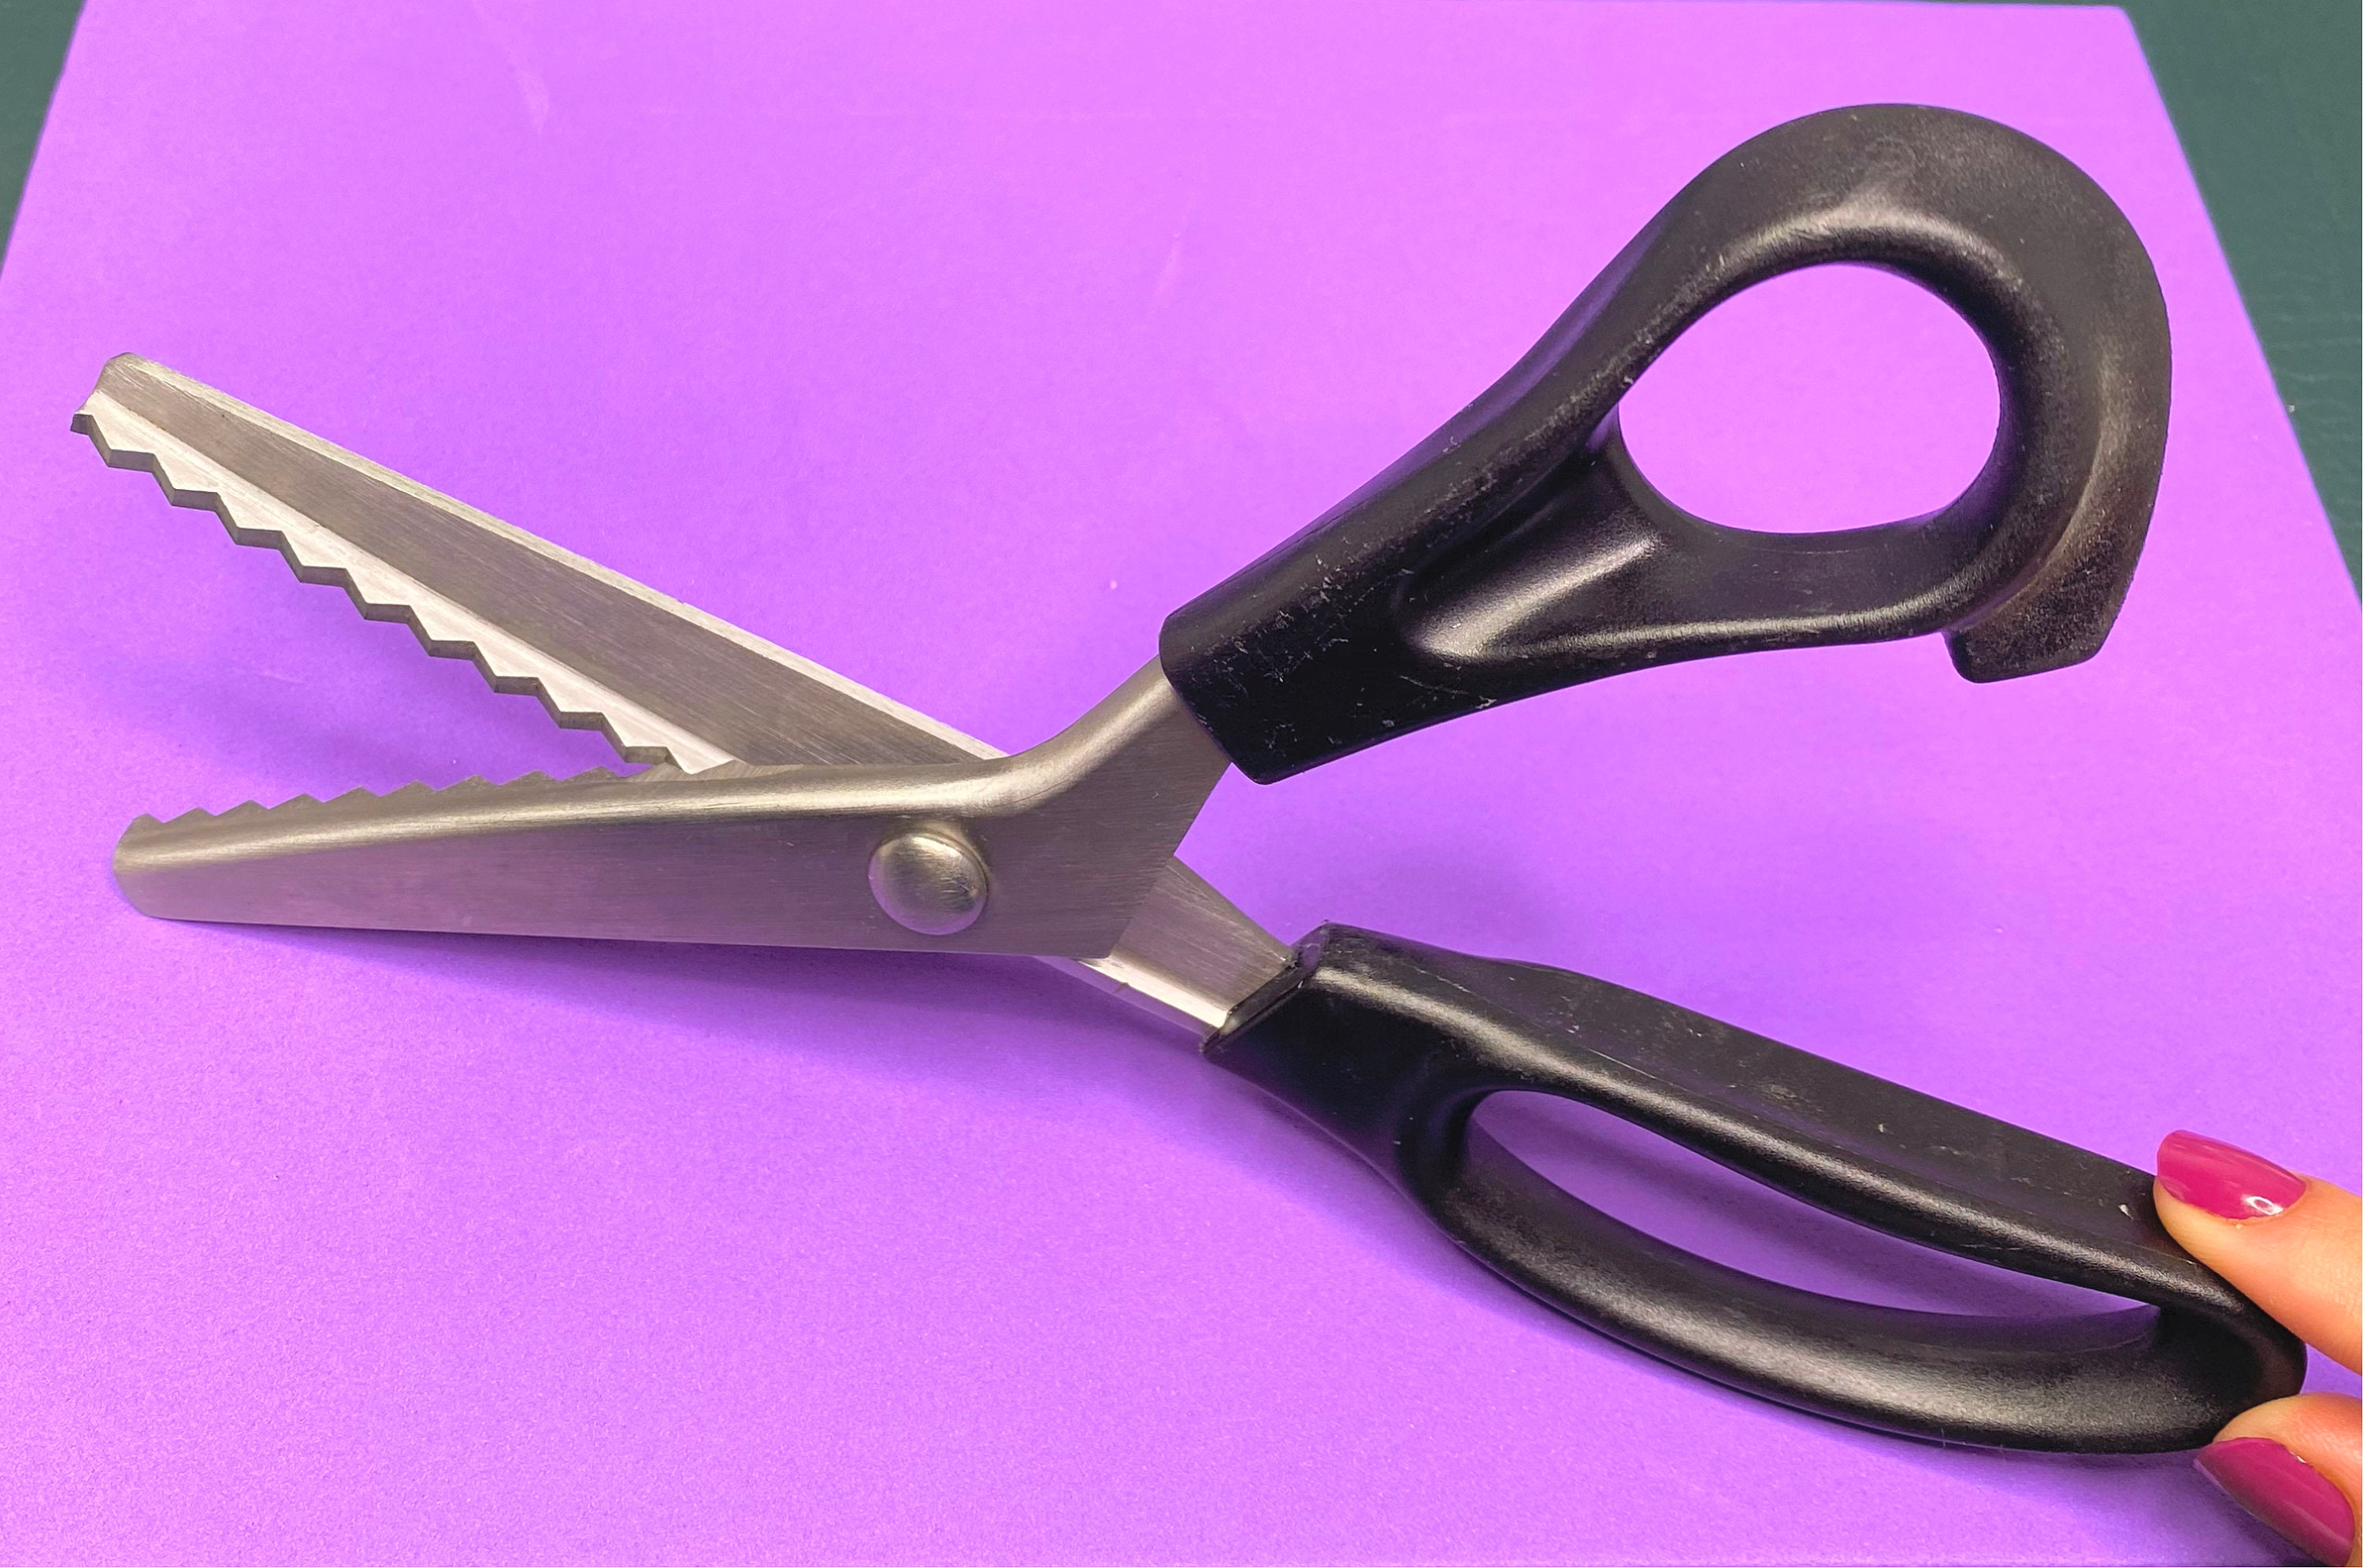 Pinkut Pinking Shears for Fabric Cutting with Cushioned Handles & Stainless-Steel Edges - 22 cm Premium Zig Zag Scissors for Crafting Dressmaking